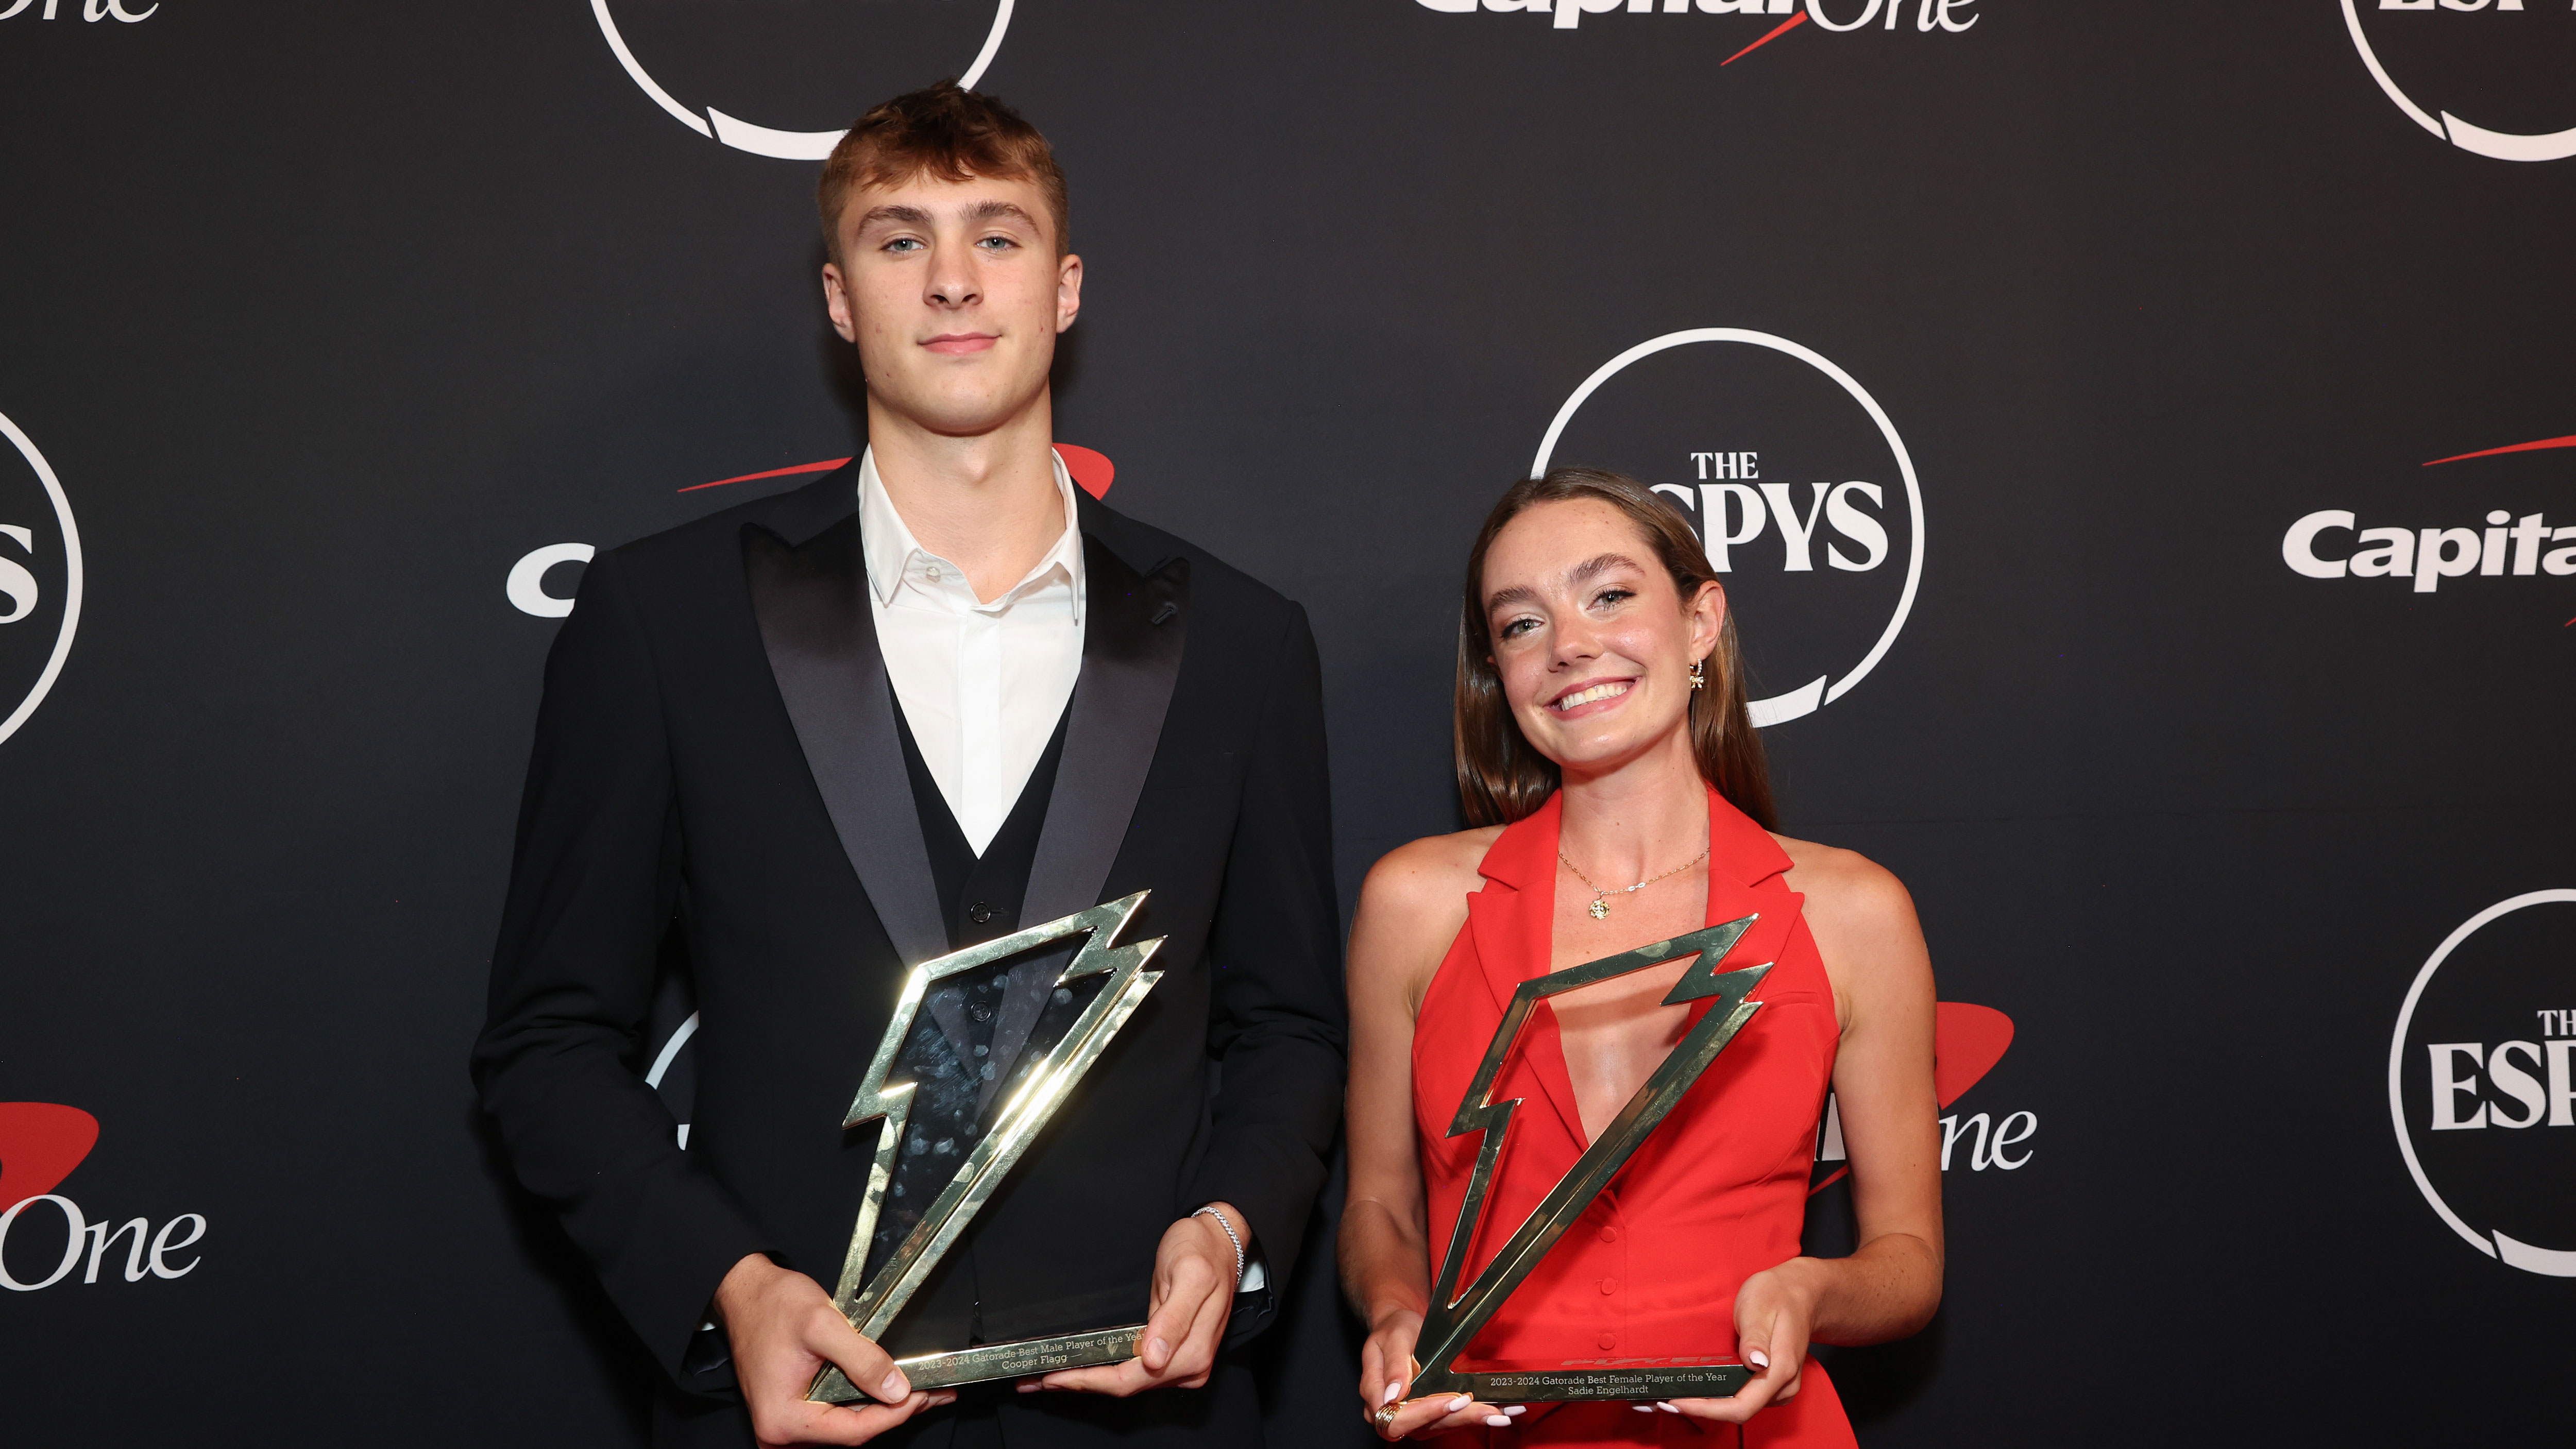 Cooper Flagg and Sadie Engelhardt named nation's top high school athletes at ESPYs